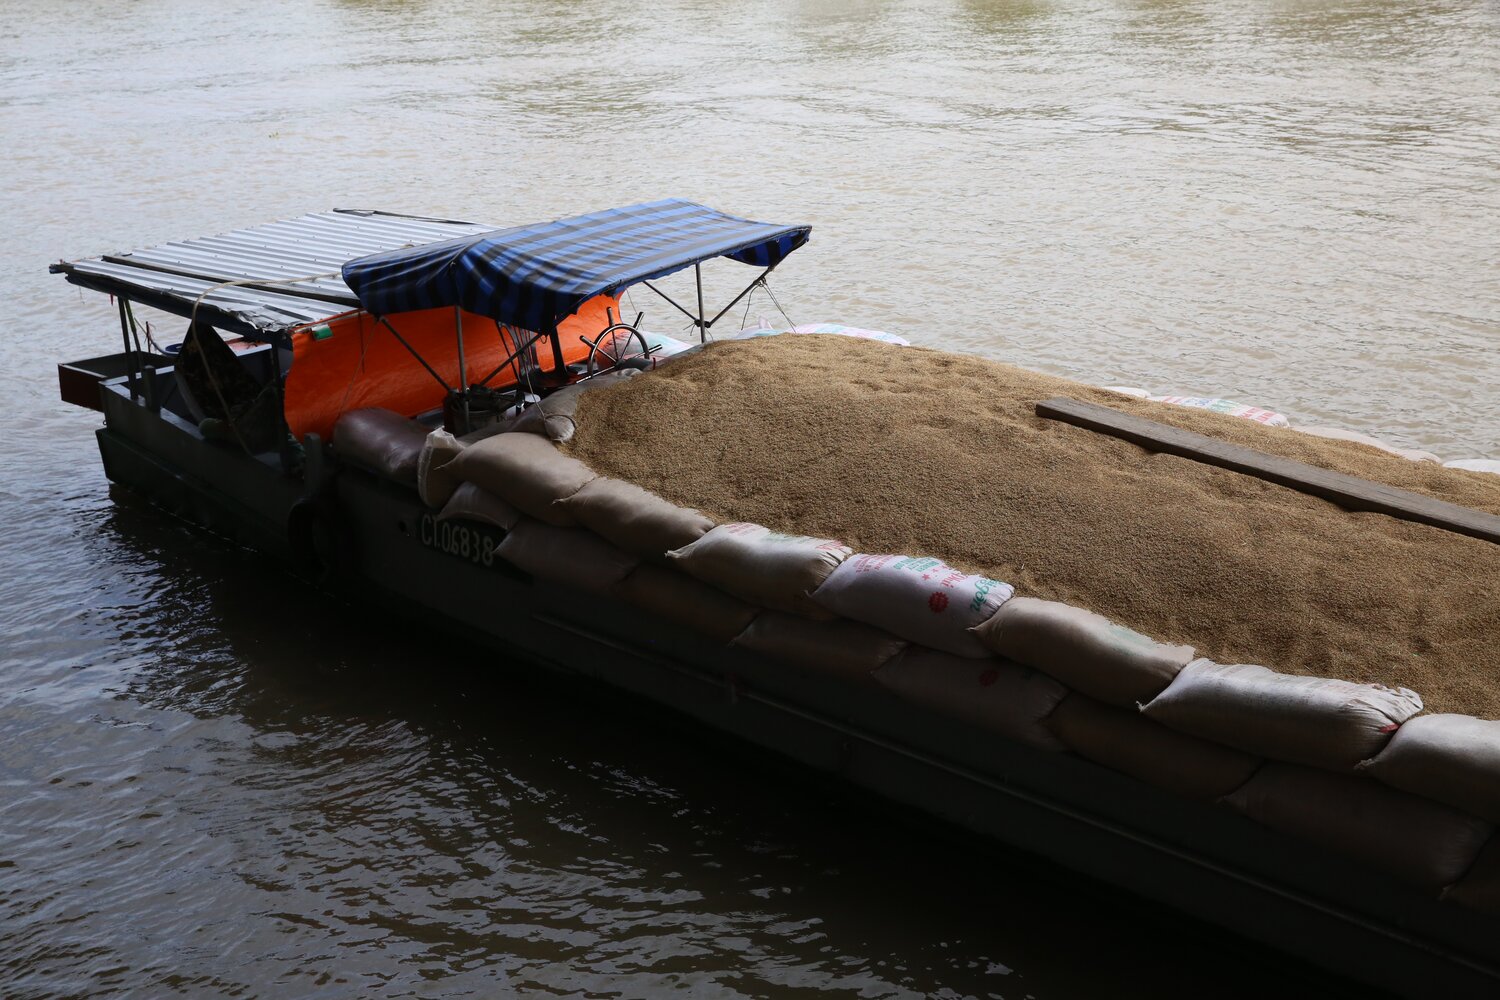 “In Vietnam, roughly 73% of cargo tonnage and about 27% of passengers travel by water annually,” says the Mekong River Commission. To better understand the role rice plays in the Mekong Delta, Ben Kilian, Crop Trust; Venu Ramaiah, IRRI; and Åsmund Bjornstad, Norwegian University of Life Sciences: NMBU, visited the rice milling corporation, Phat Tai, LTD, which owns five mills located at the edge of the Mekong River. Photo: L.M. Salazar 